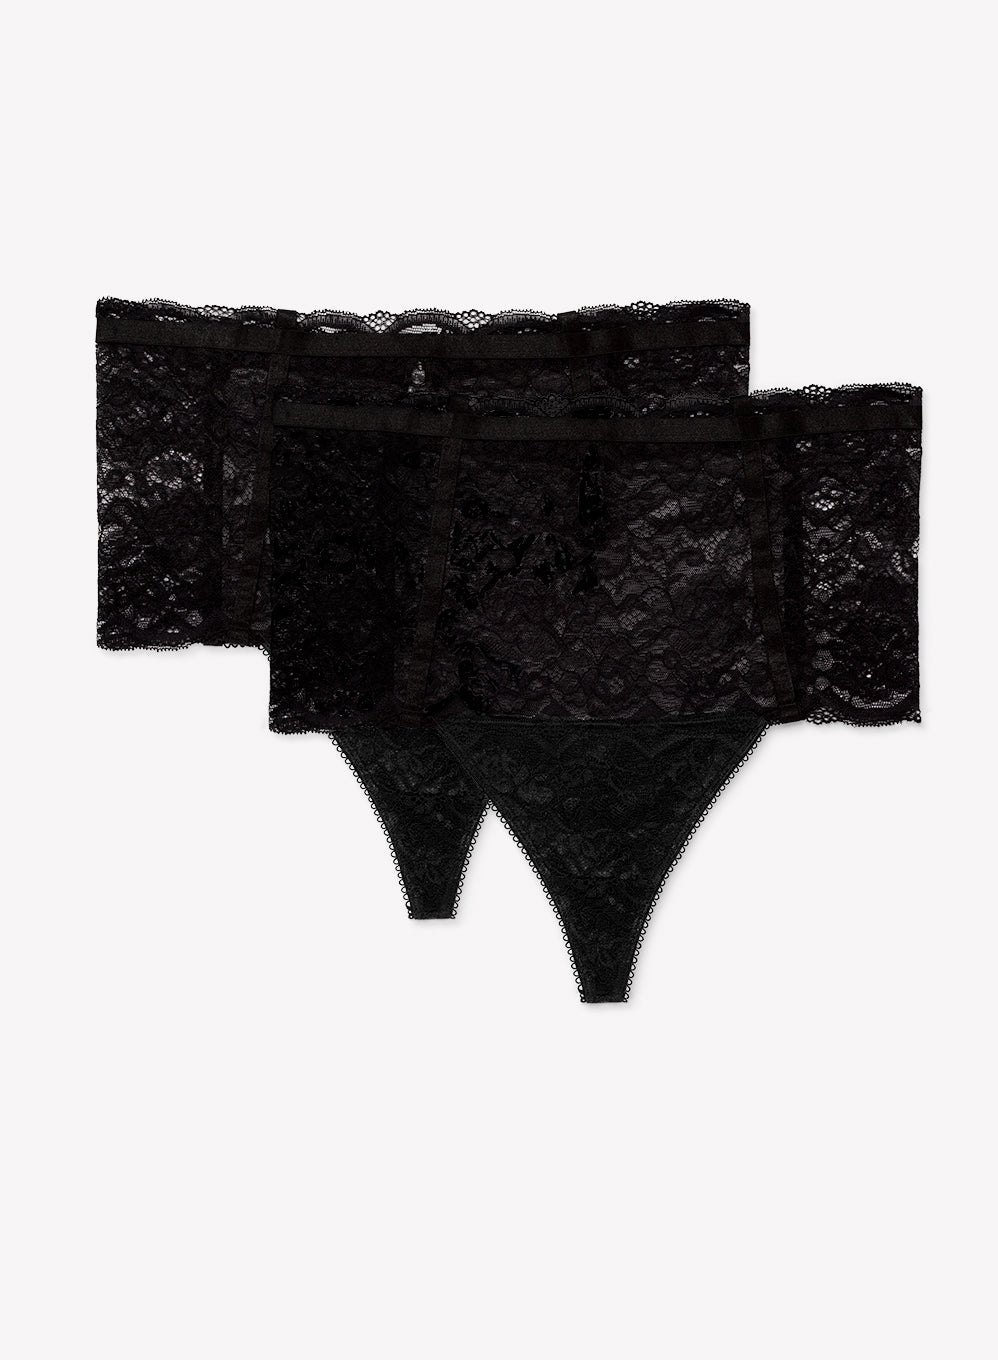 Xmarks Lace Thongs 2 Pack for Women Sexy High Waisted Thong